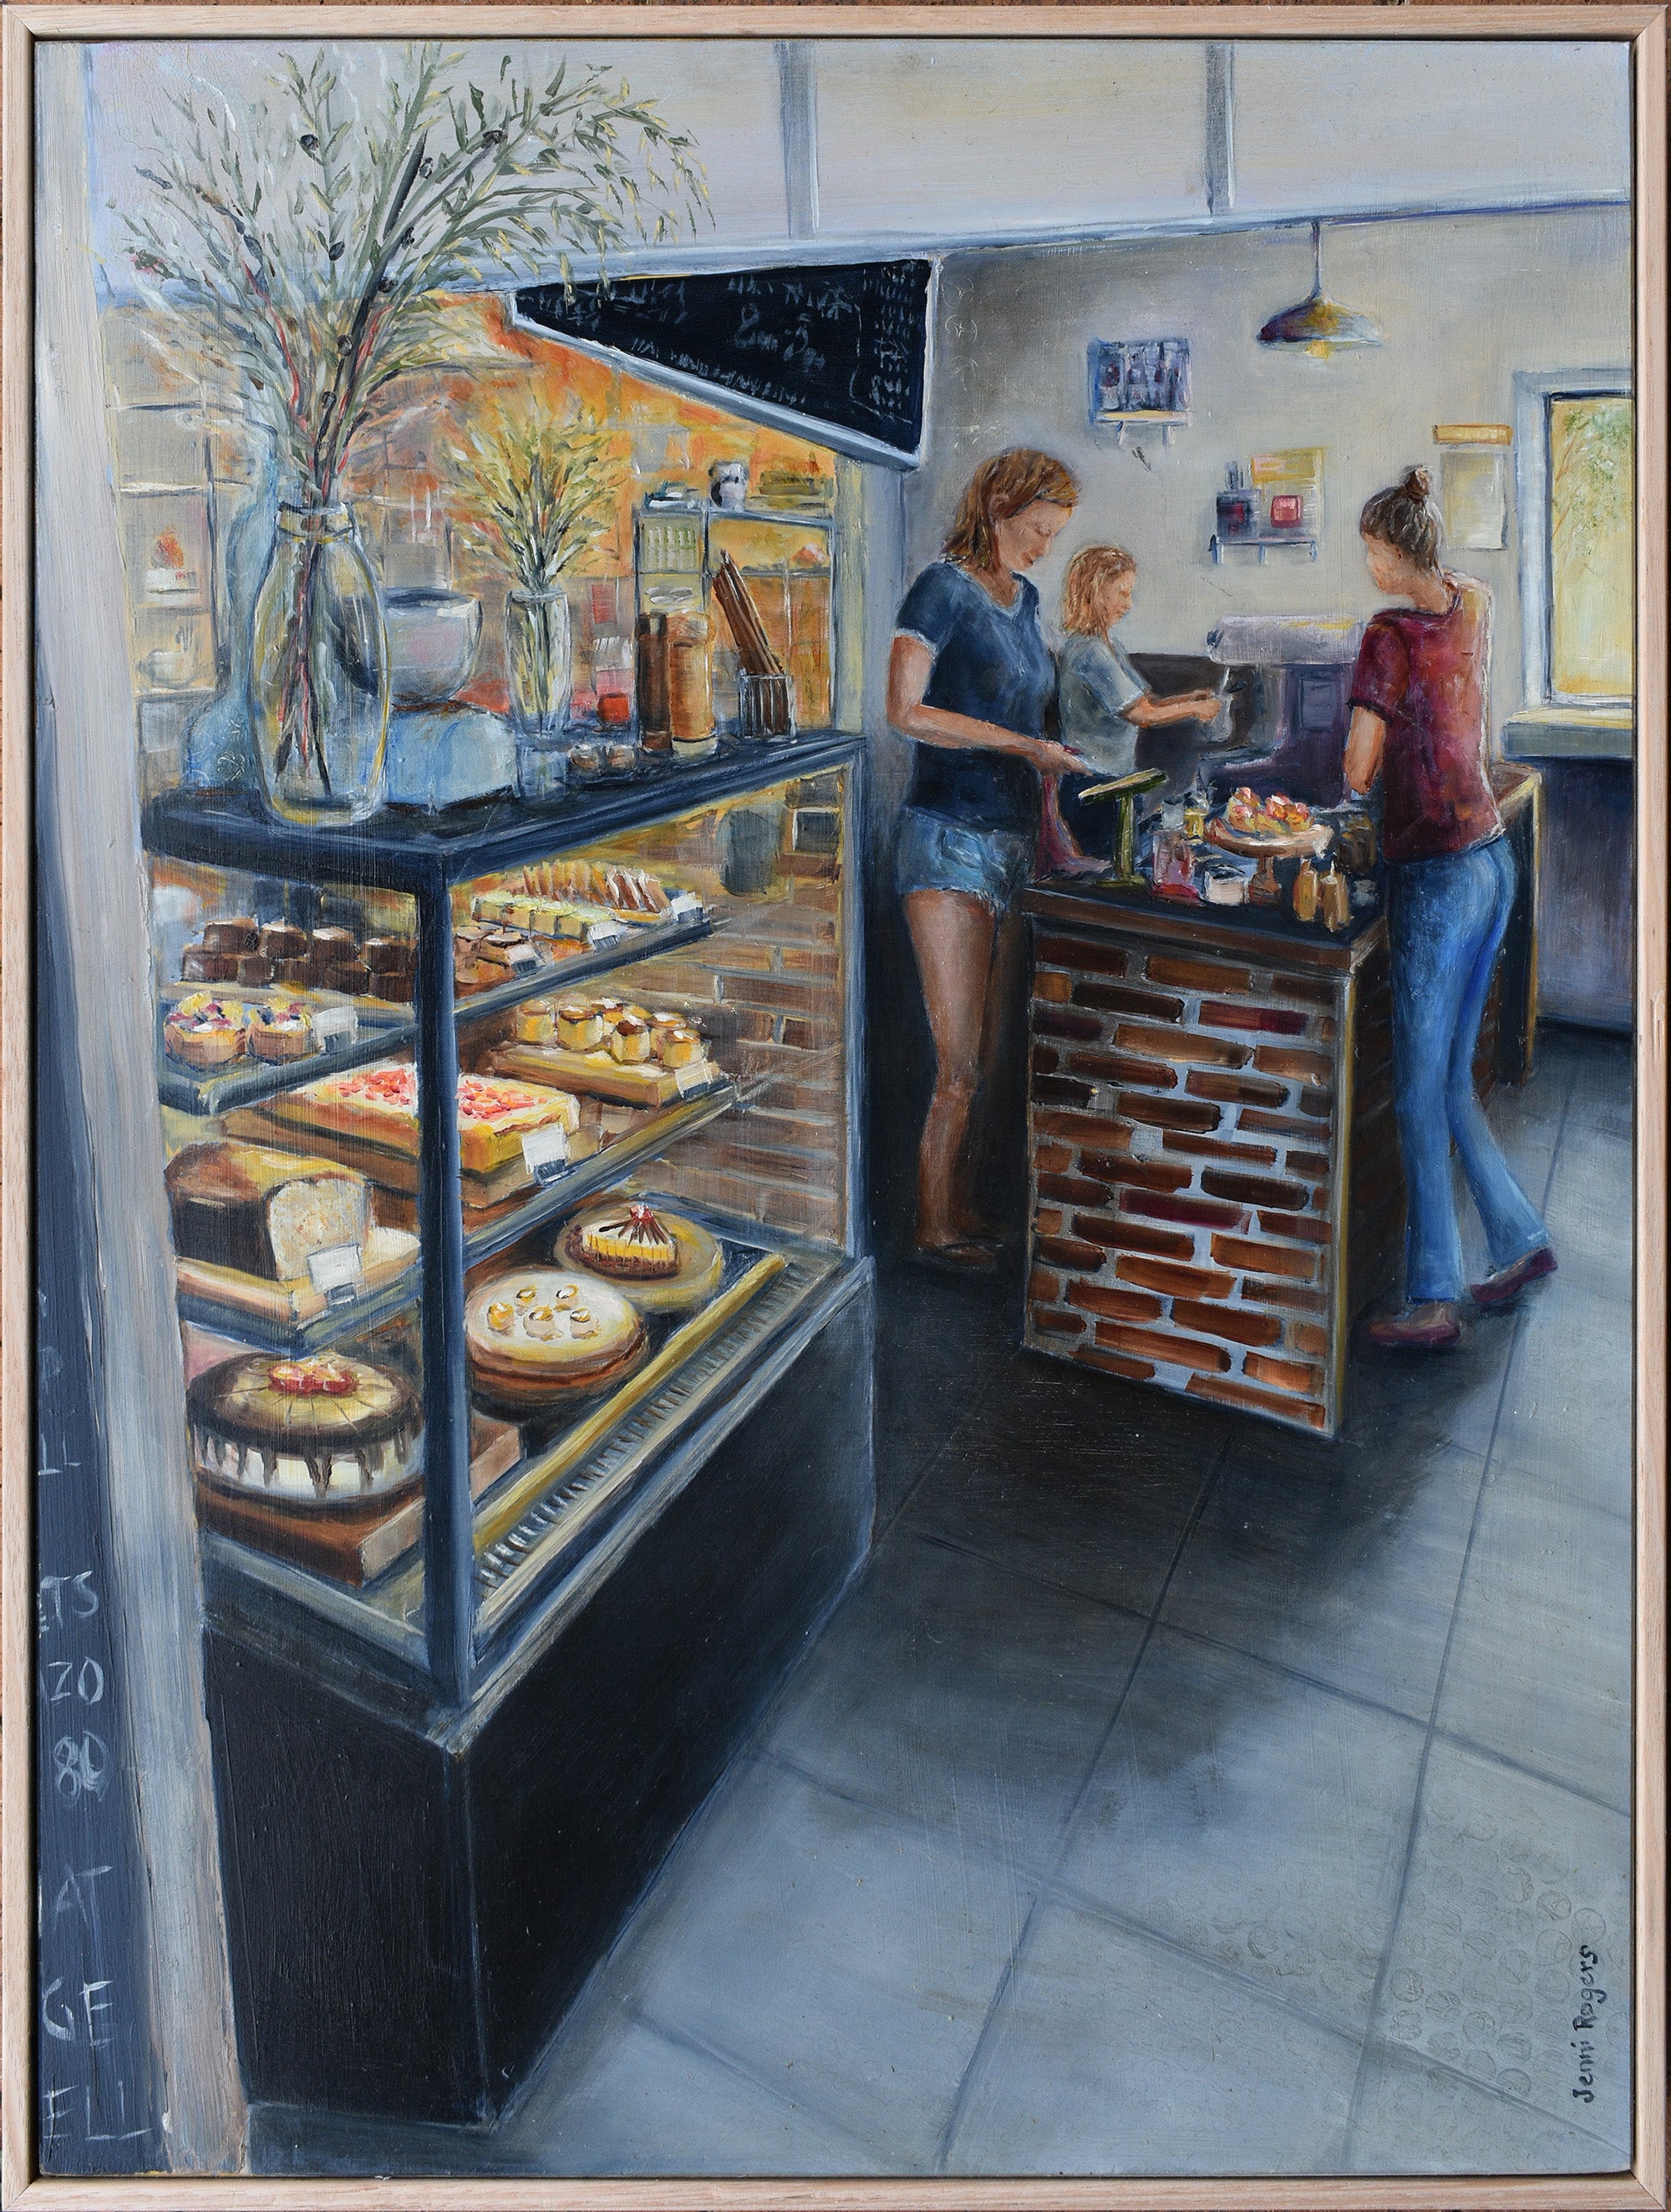 This is a painting of the inside of my favourite cafe at Shelley Beach, Ballina The  Belle General.  Their cake fridge is mesmerising and not to mention, delicious.  Every cake imaginable, coffee aromas and fresh muffins.  The anticipation of what to choose, maybe I’ll get one of each! by Australian Artist Jenni Rogers